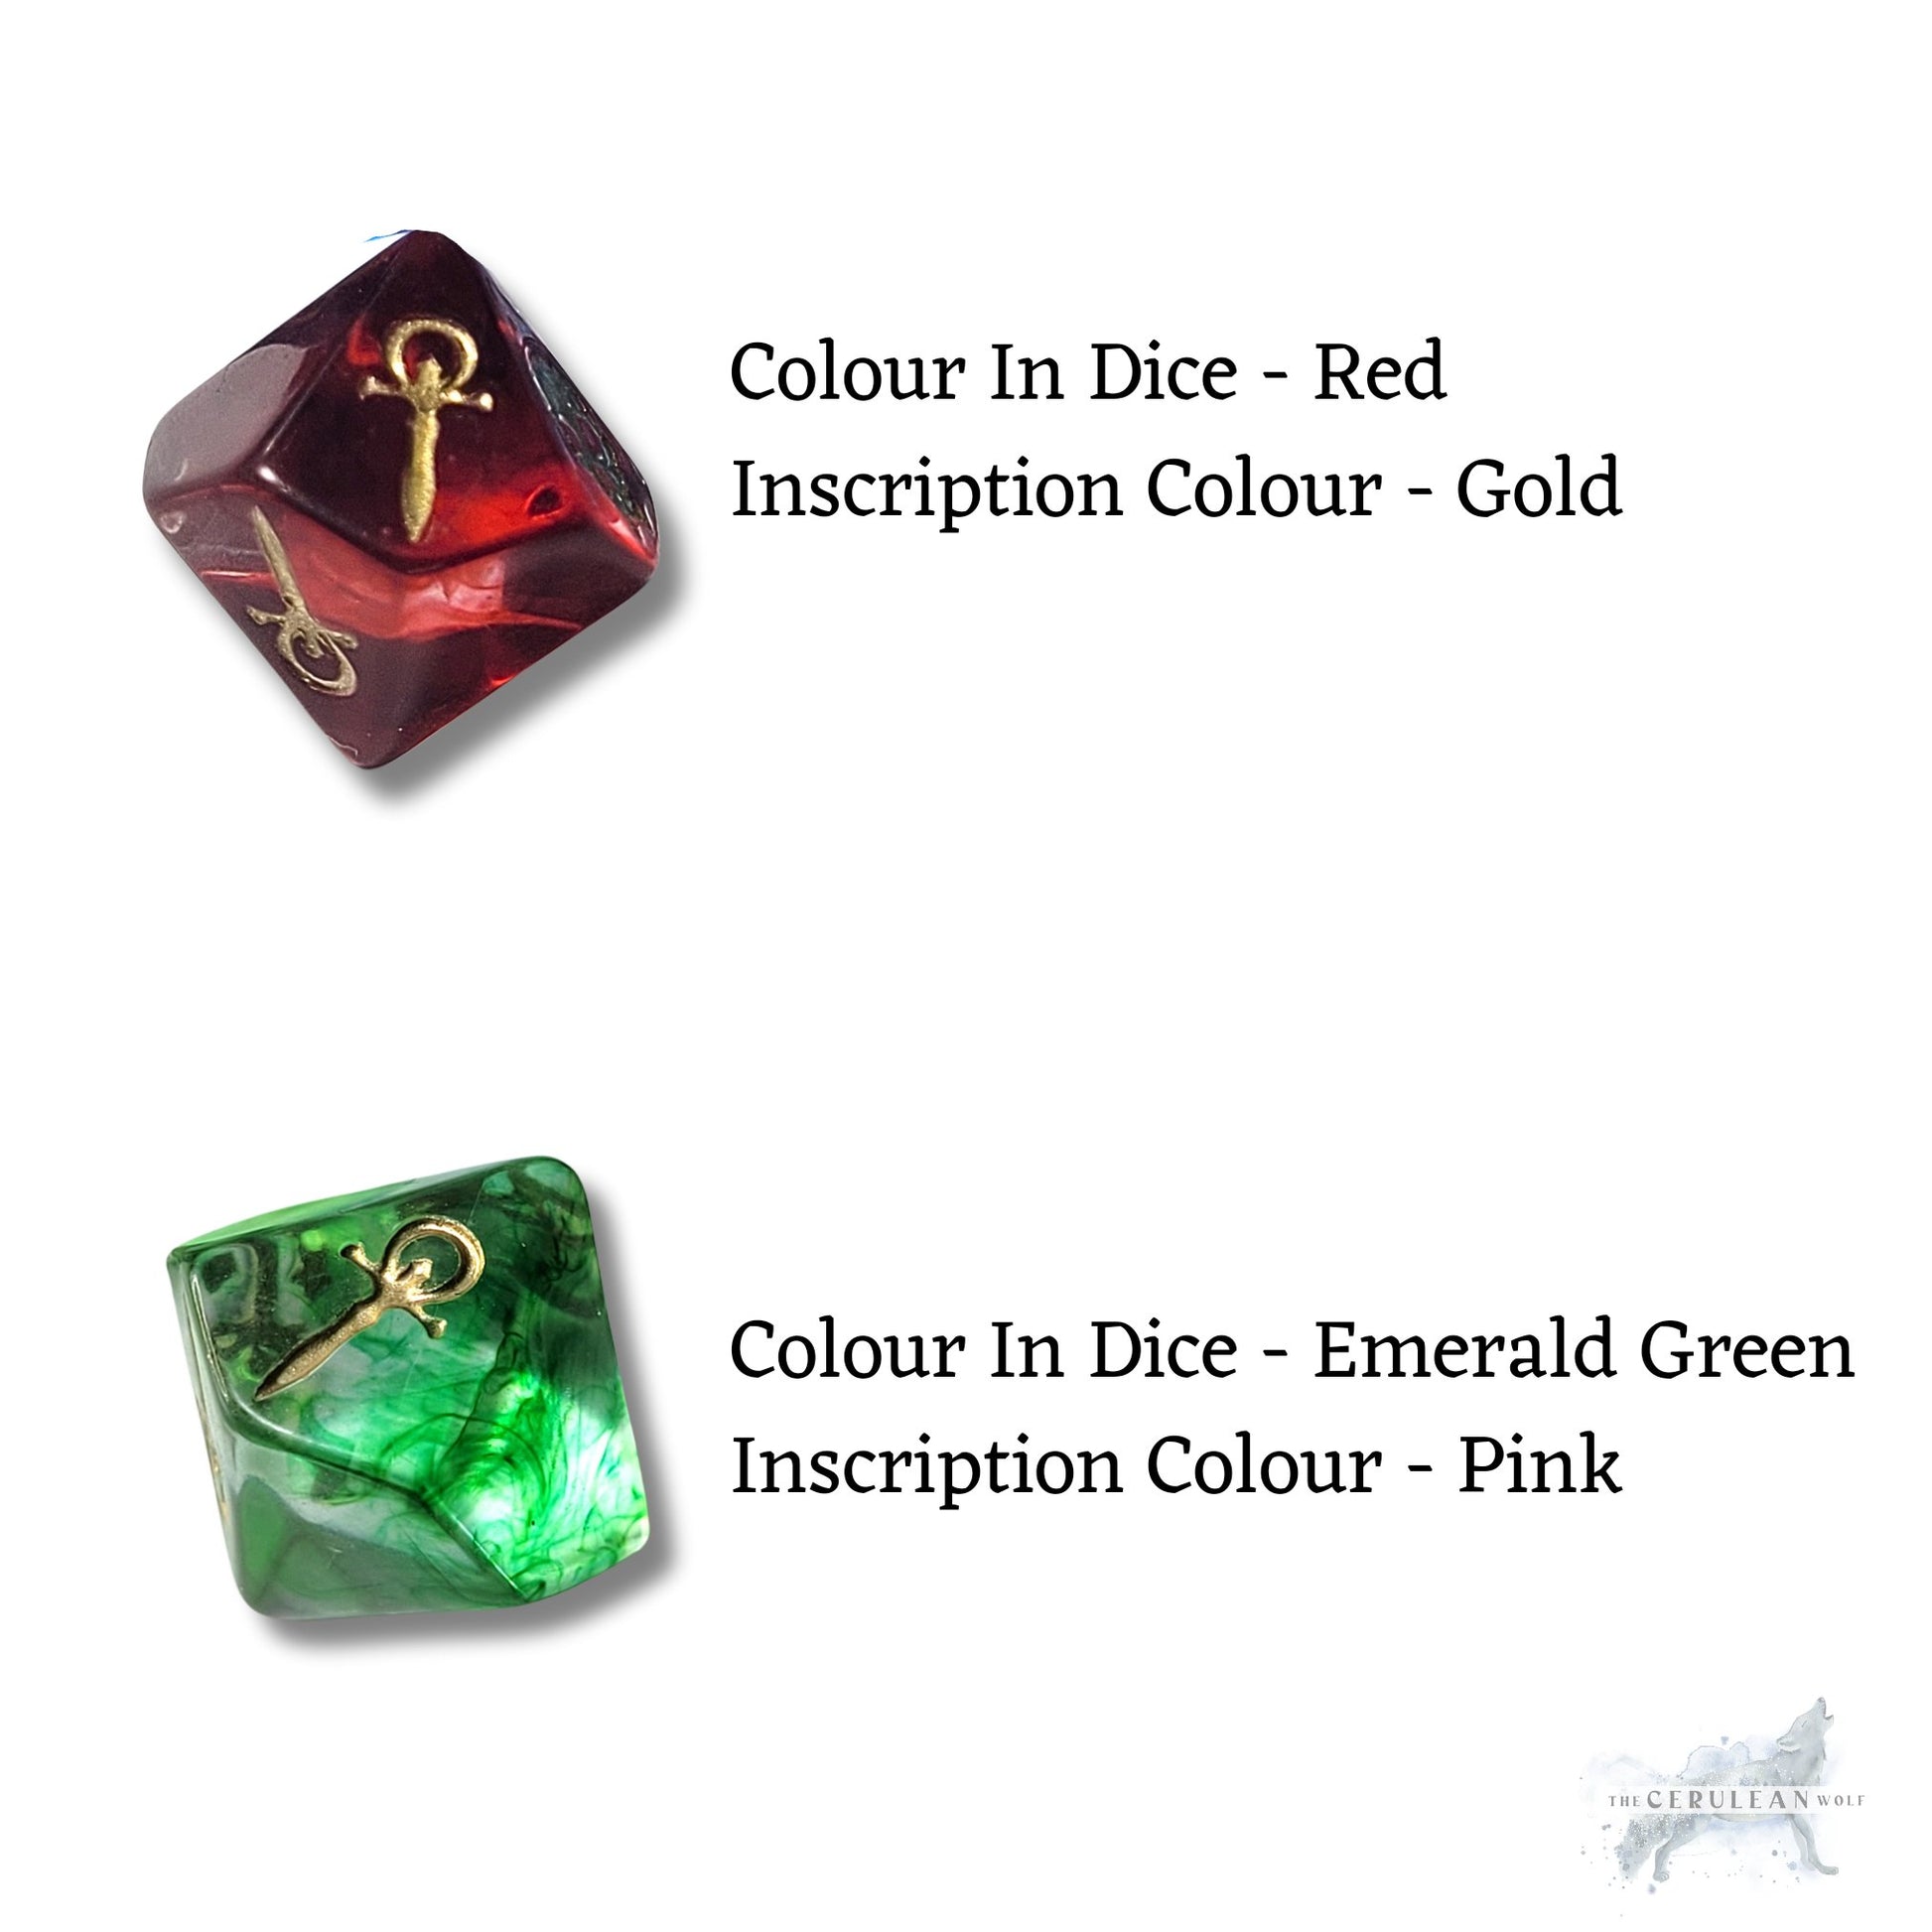 Customisable VtM Vampire Dice - The Cerulean Wolf